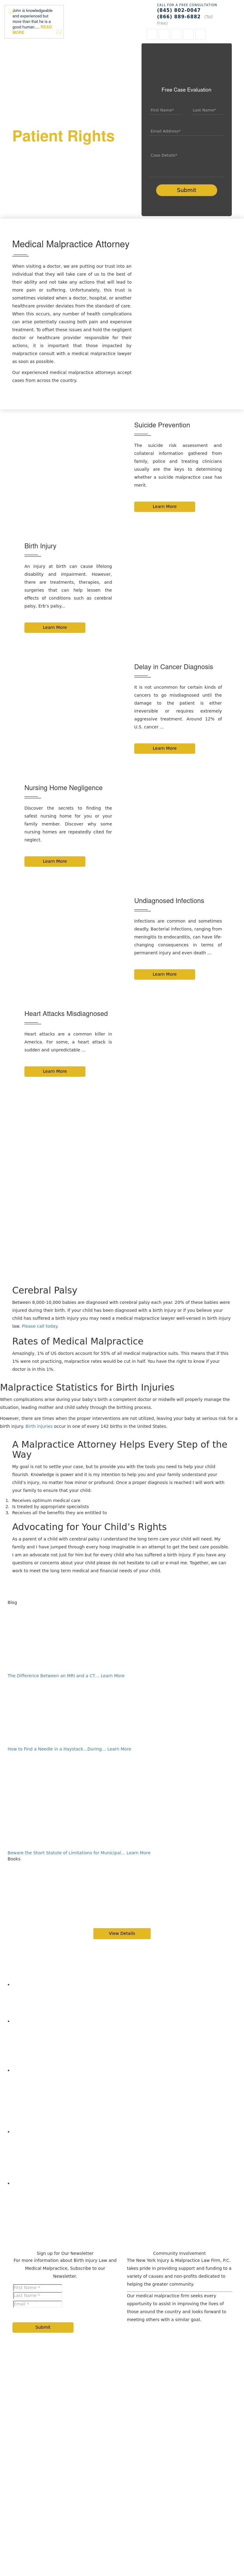 The New York Injury & Malpractice Law Firm, P.C. - Kingston NY Lawyers